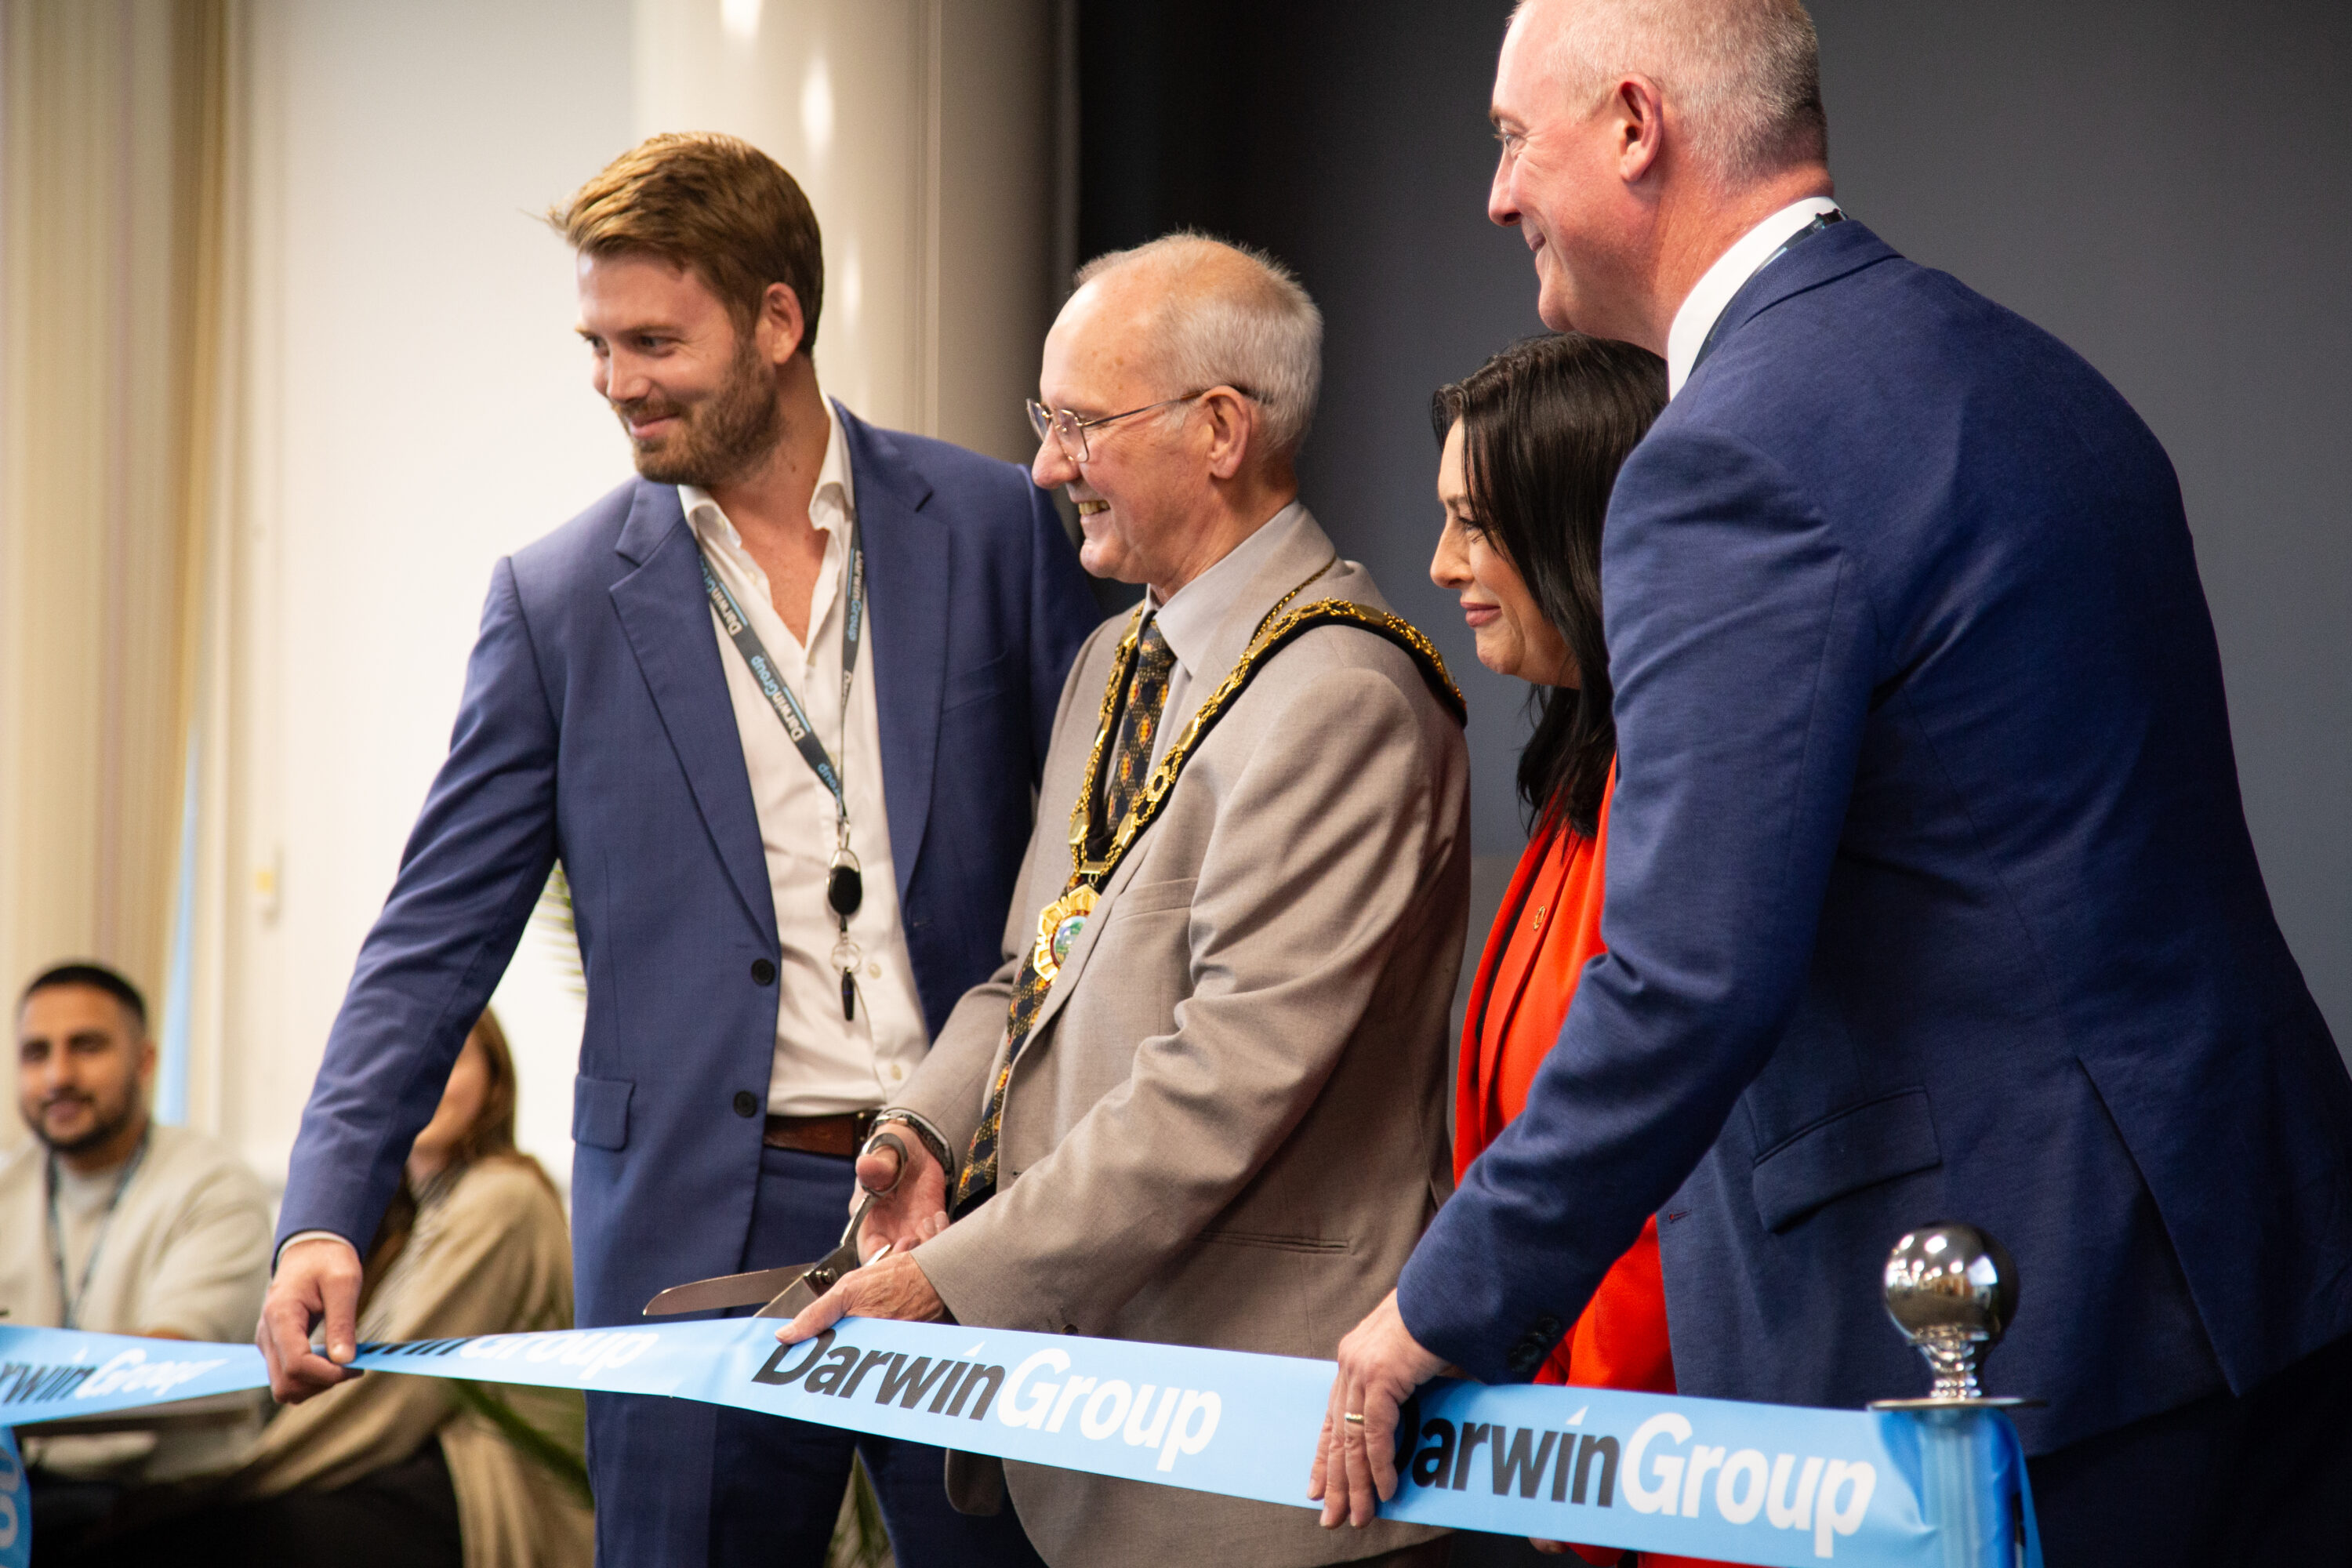 The Darwin Group CEO, Richard Pierce, and Deputy CEO, Jim Pierce stand alongside the Telford & Wrekin Council mayor and Councillor Eileen Callear during the ribbon cutting ceremony.